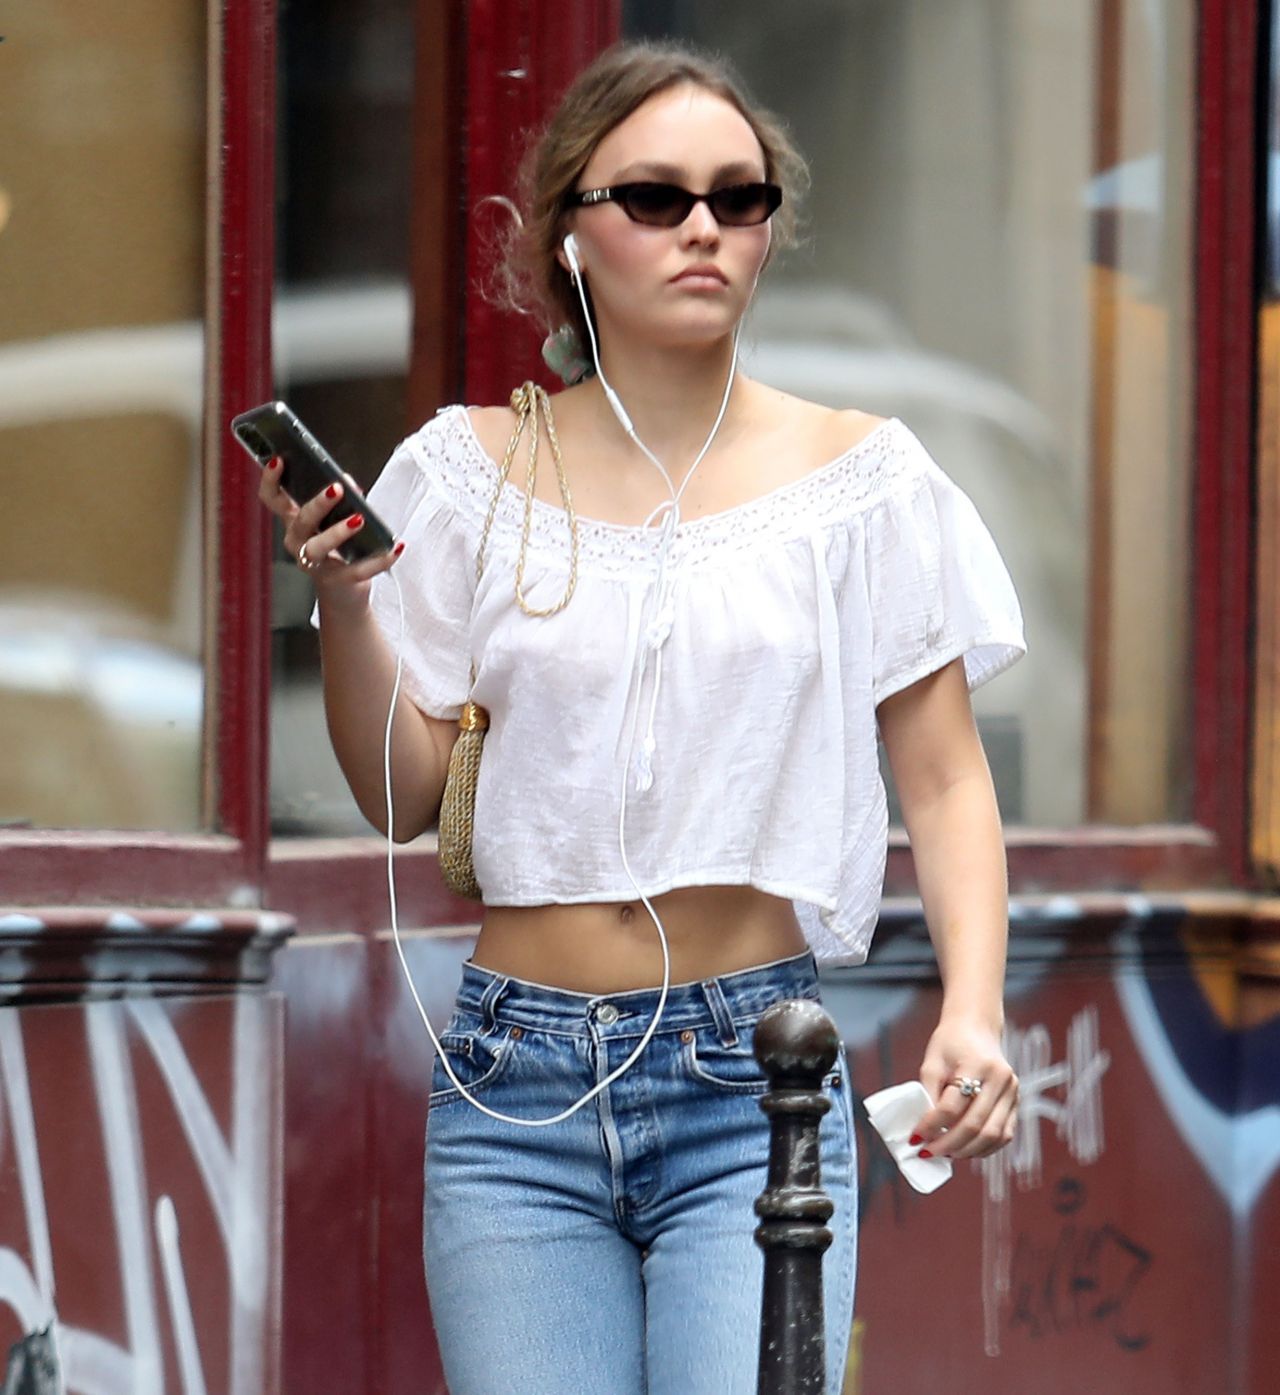 Lily Rose Depp Style, Clothes, Outfits And Fashion • CelebMafia